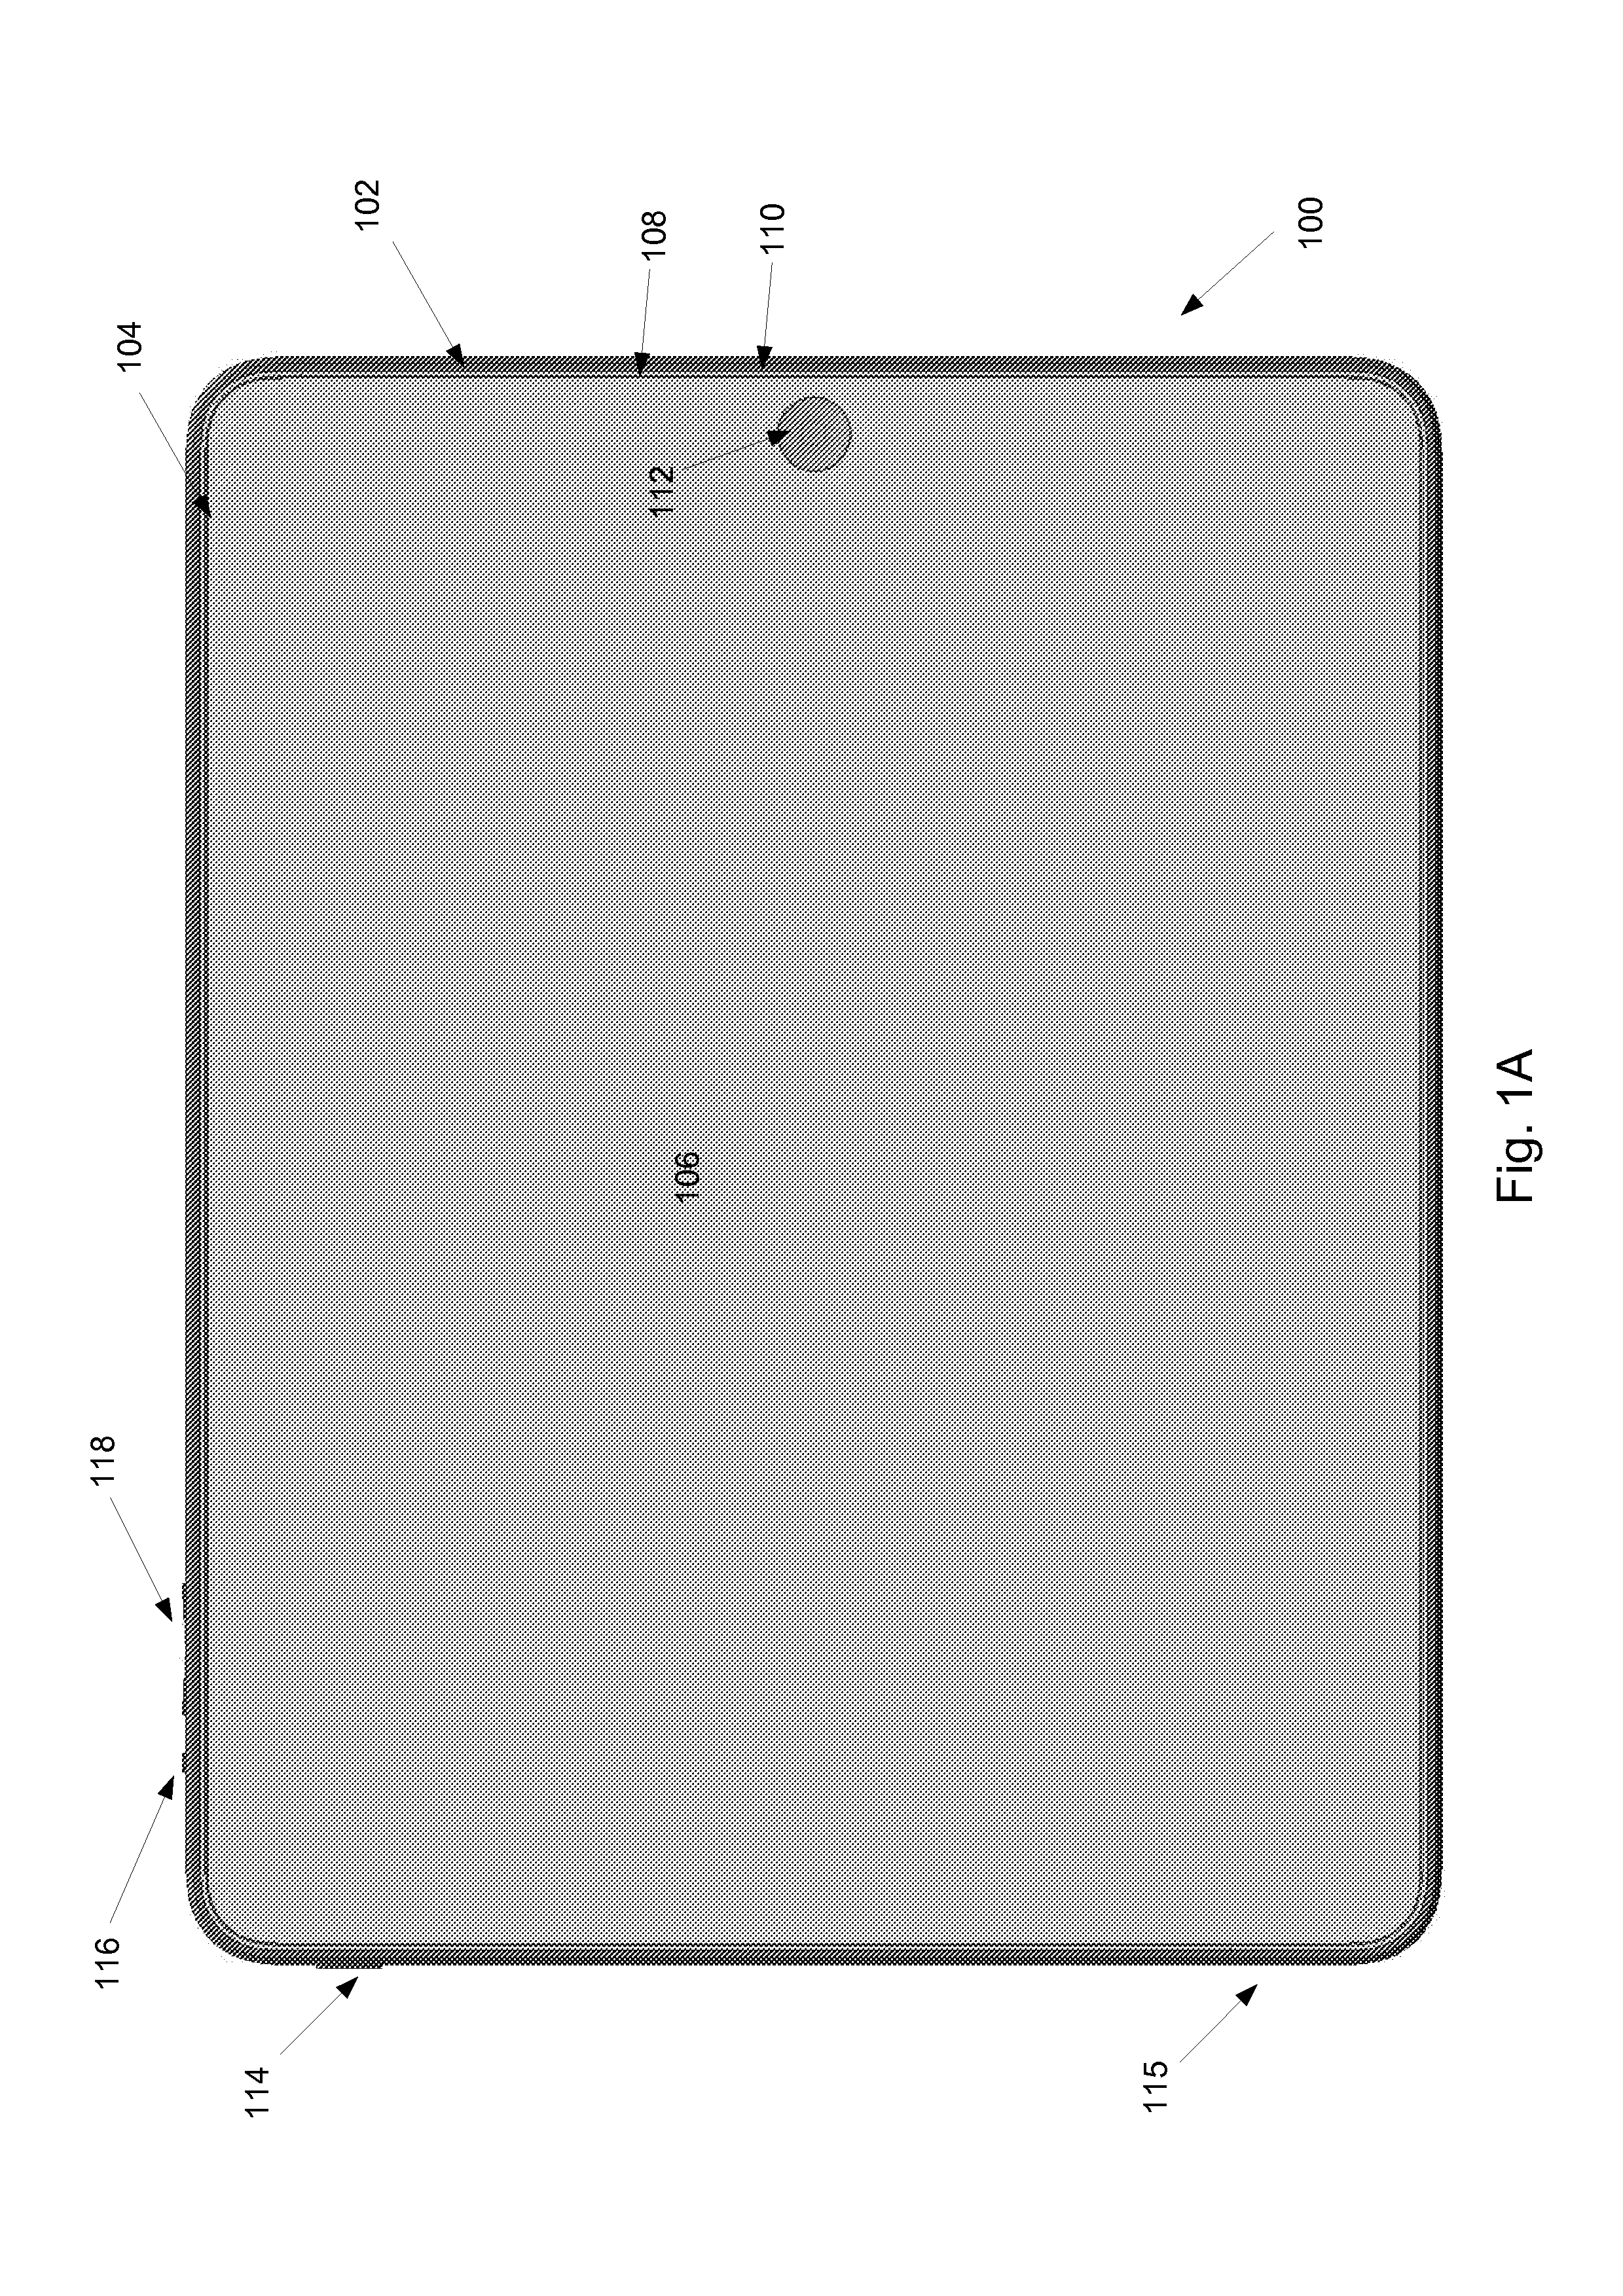 Assembly of a display module